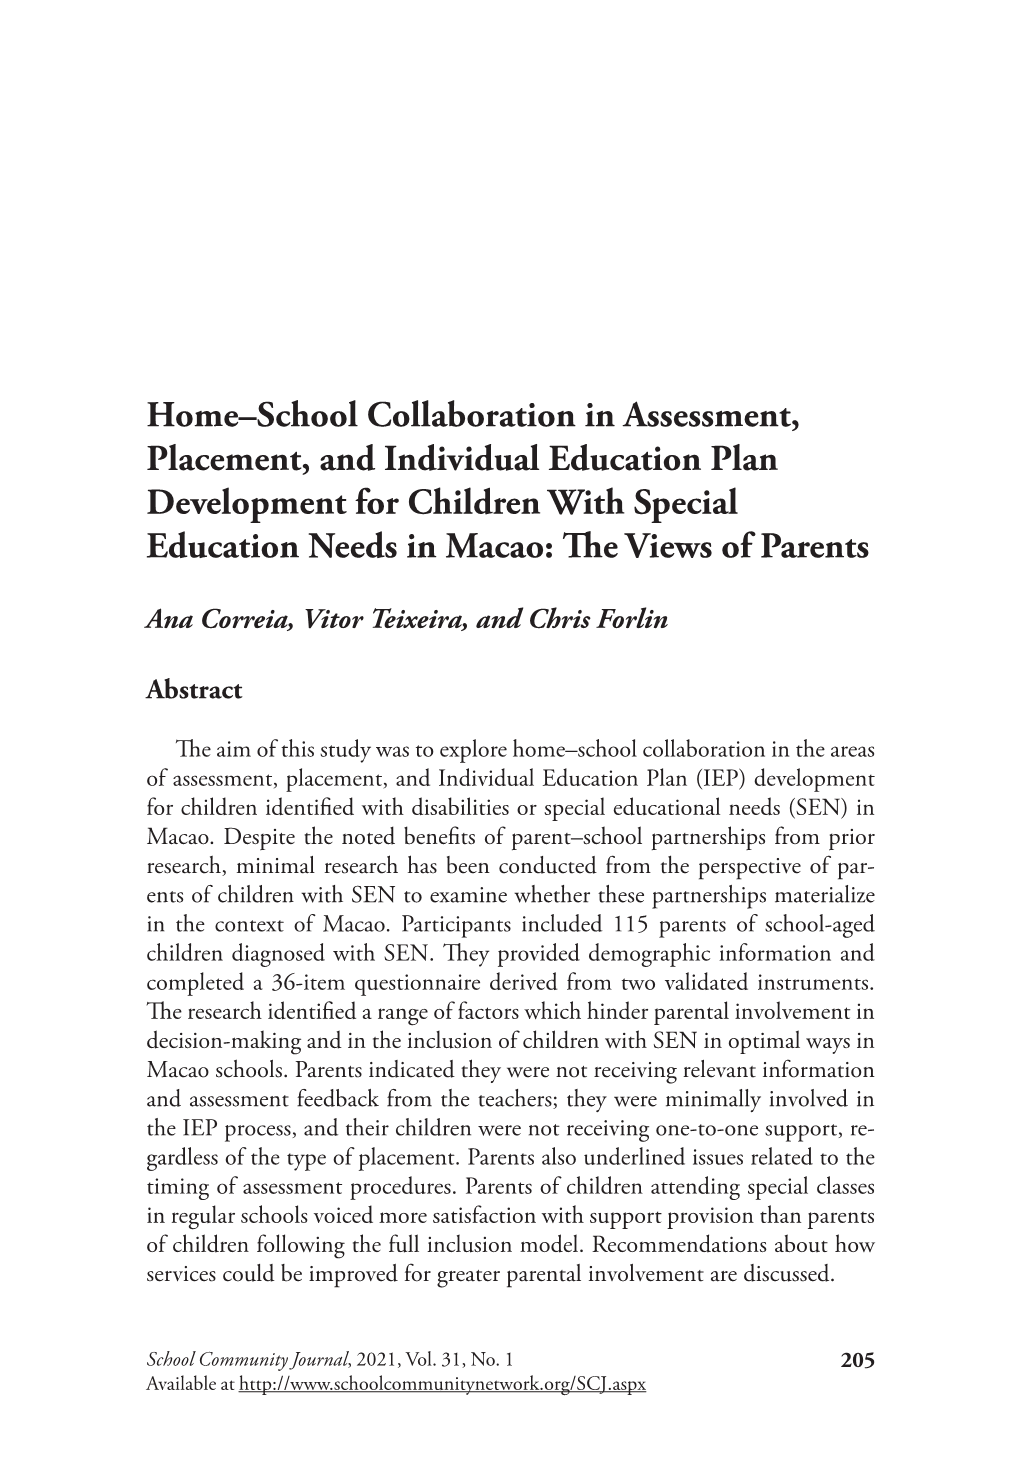 Home–School Collaboration in Assessment, Placement, and Individual Education Plan Development for Children with Special Education Needs in Macao: the Views of Parents